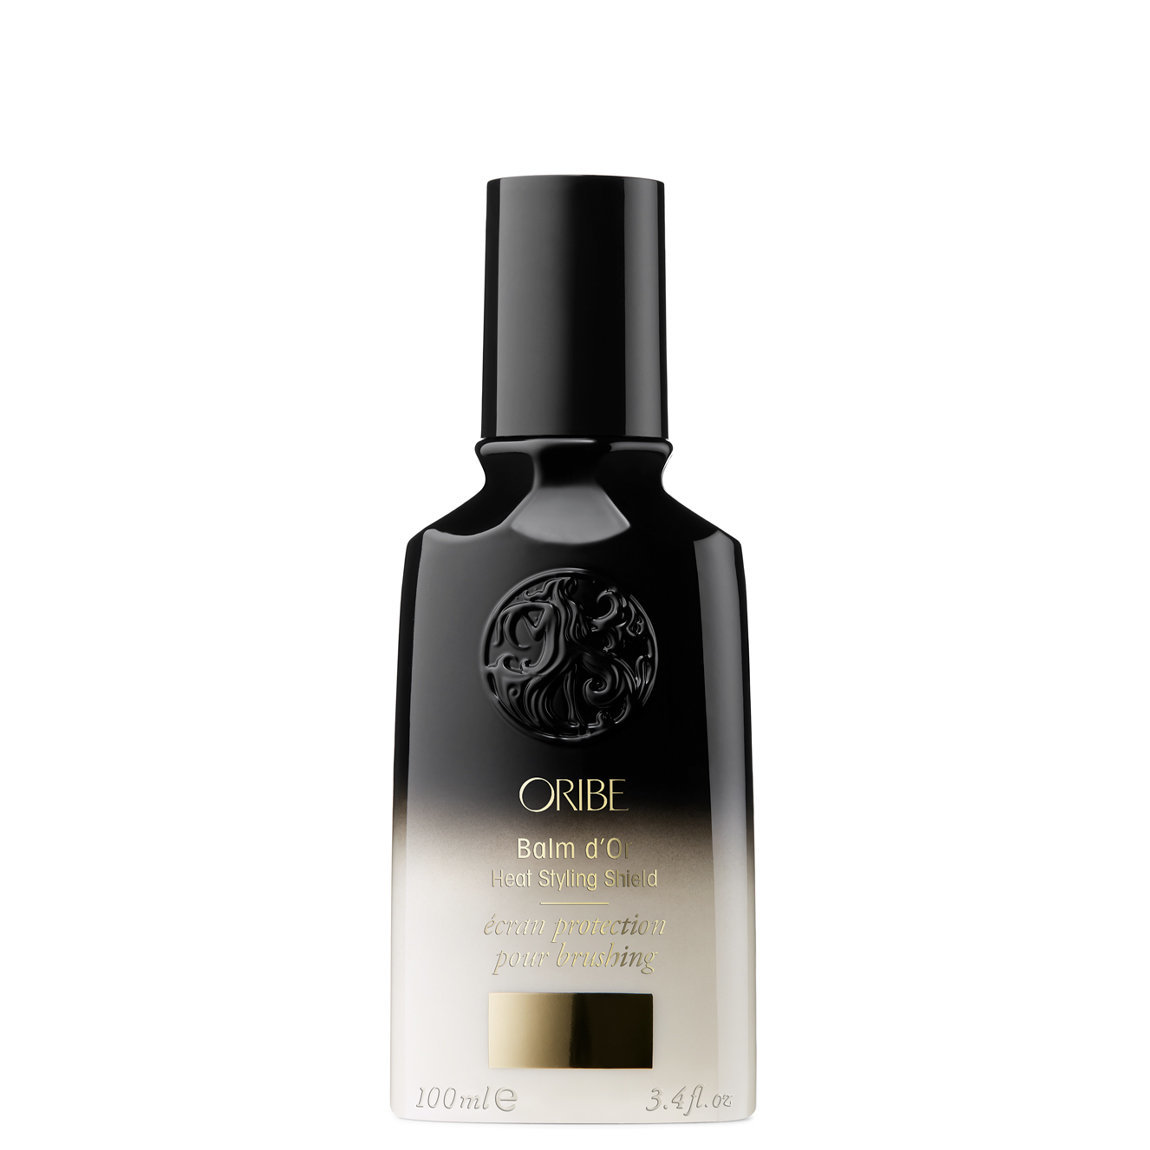 Oribe Balm D'Or alternative view 1 - product swatch.